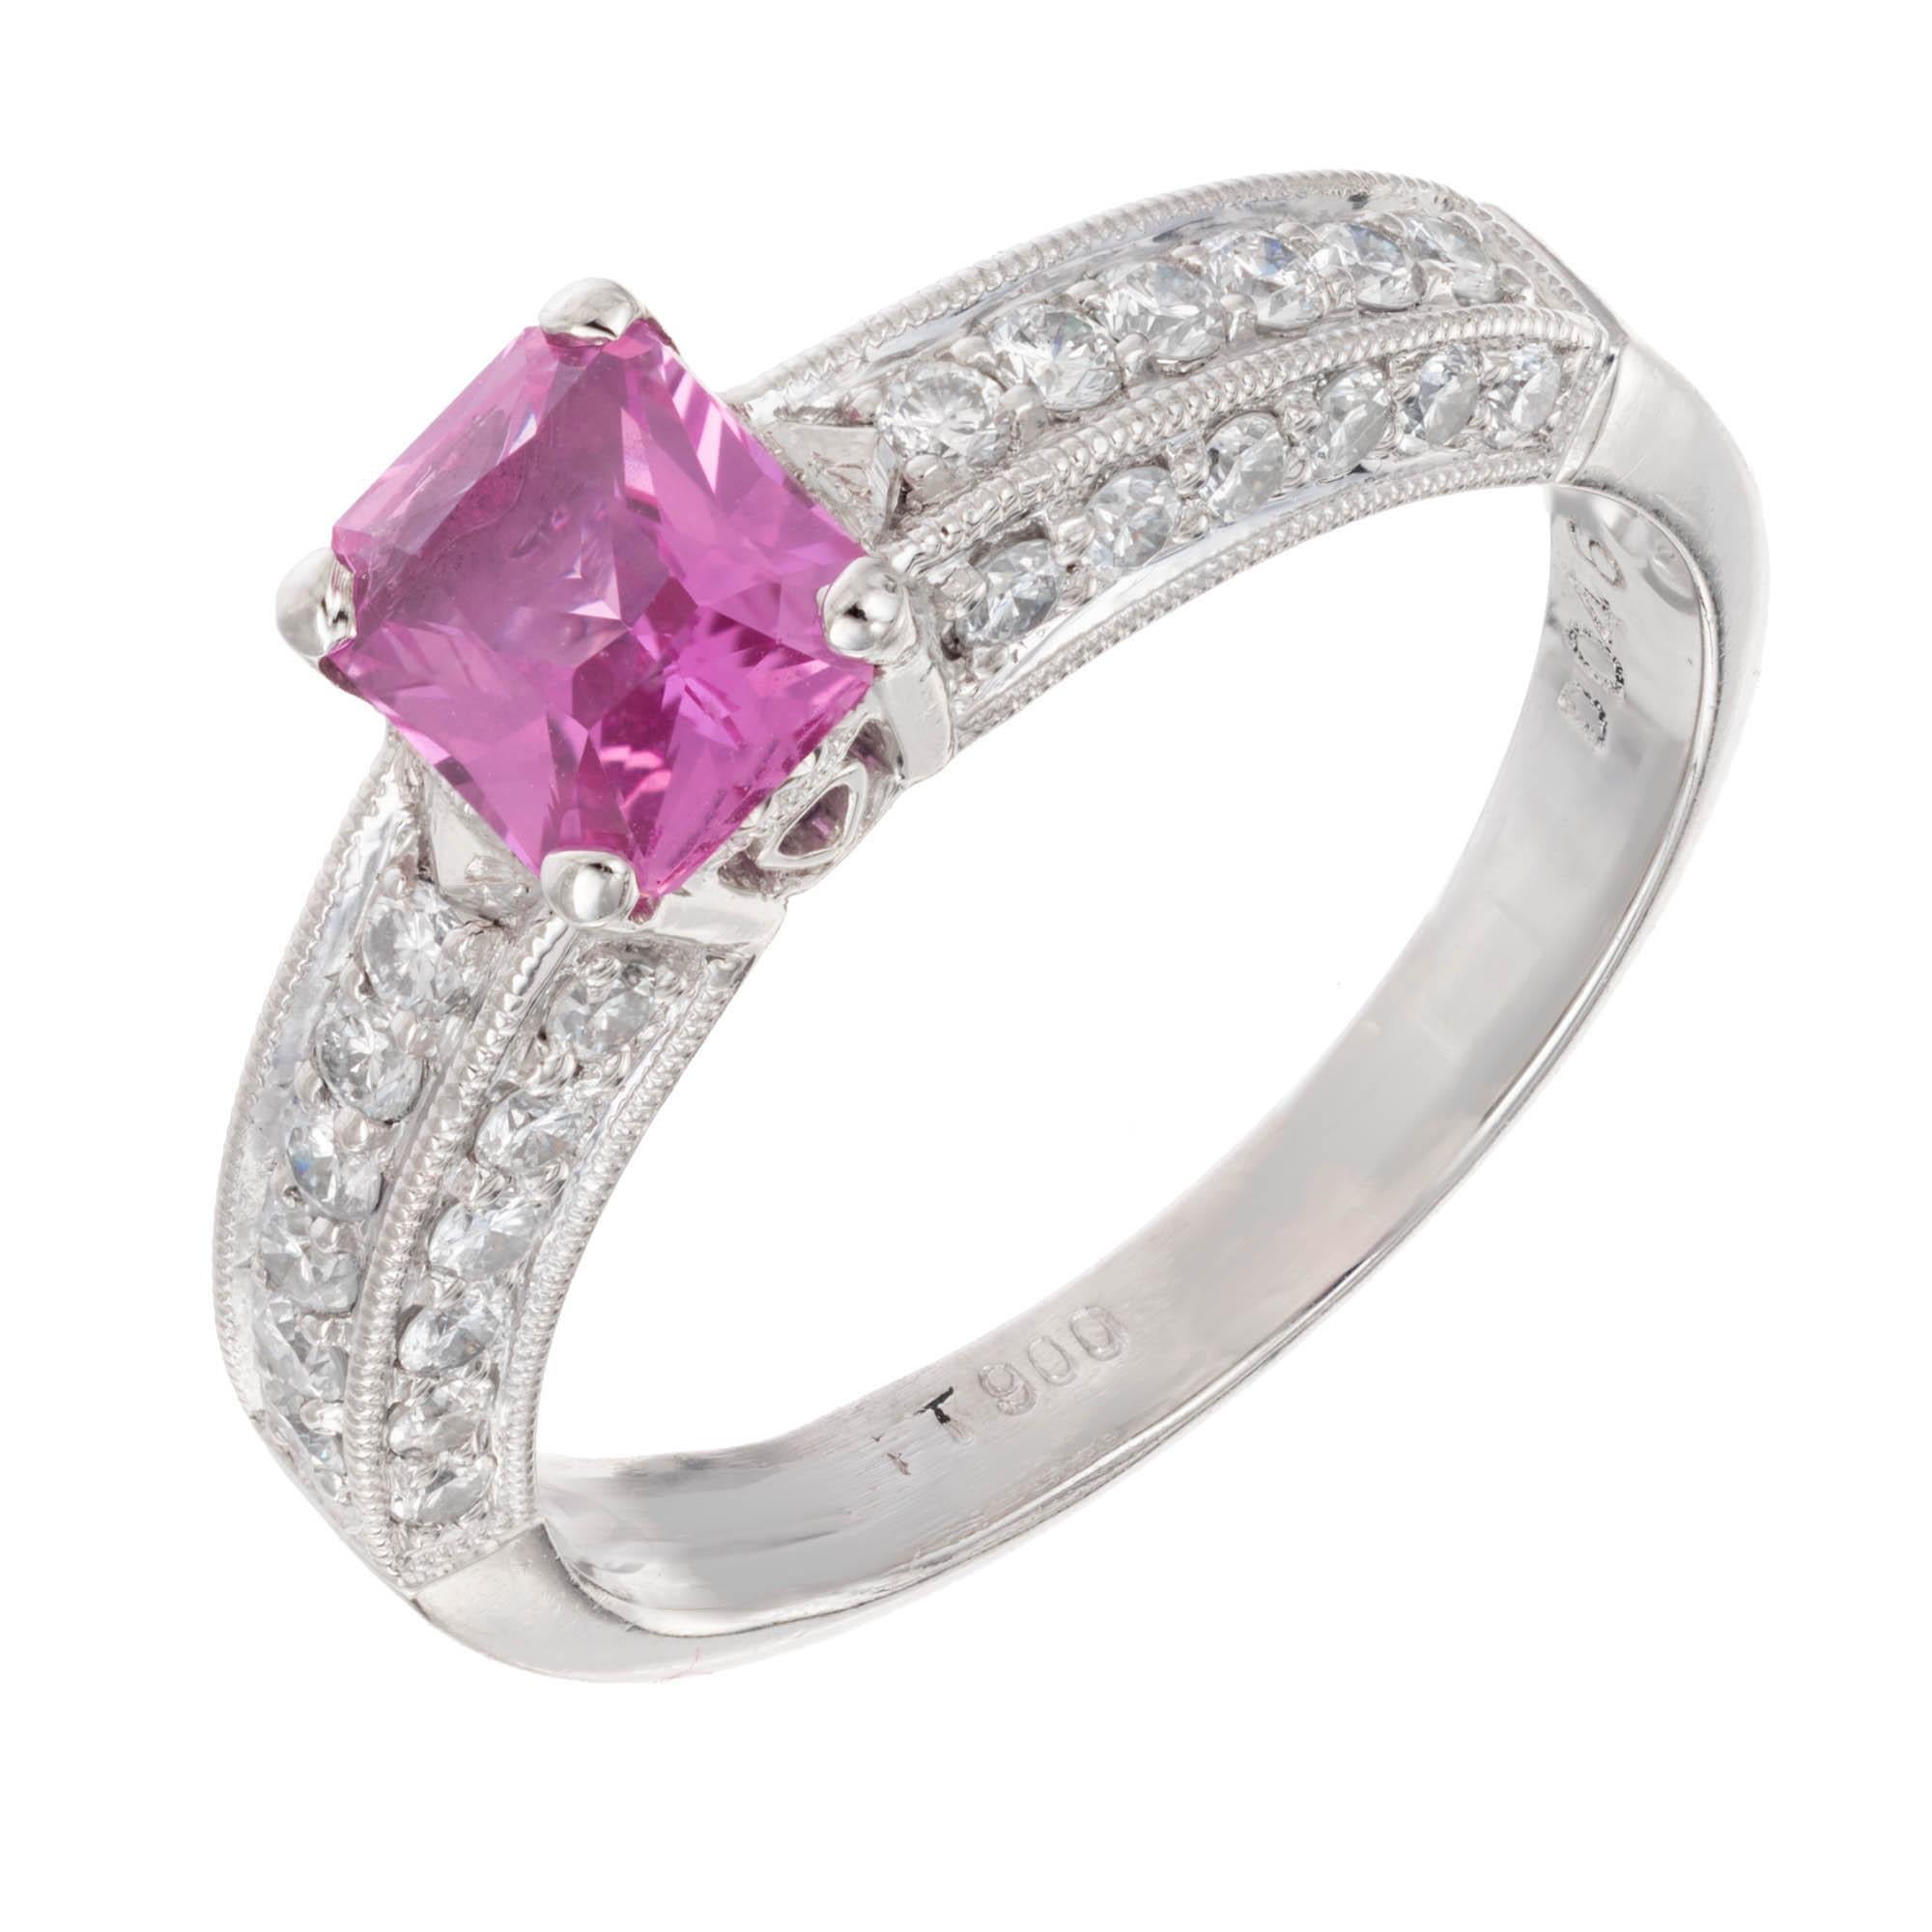 Peter Suchy Emerald Cut Pink Sapphire and diamond engagement ring. 1930’s bright pink GIA Certified natural sapphire in a platinum setting with round accent diamonds. Created by the Peter Suchy Workshop

1 octagonal pink SI sapphire, Approximate .93